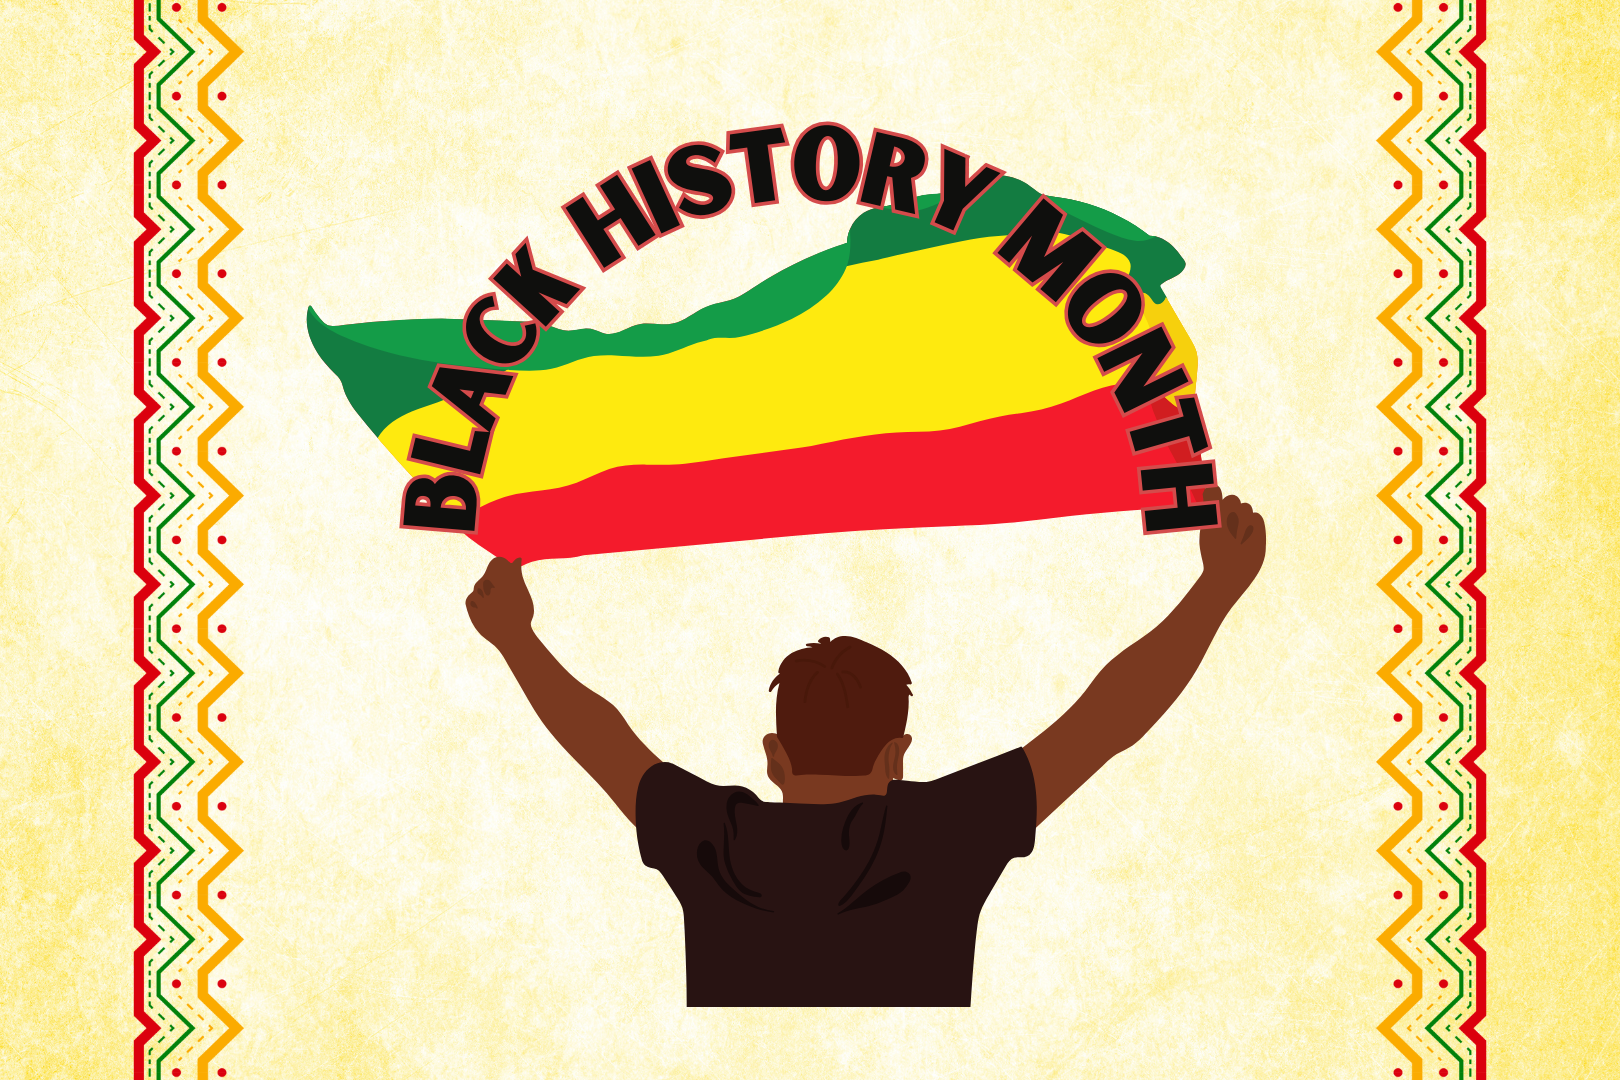 Black History Month is an annual month-long observance in February where we come together to celebrate the achievements and remember the sacrifices made on behalf of Black Americans throughout U.S. history. (Created in Canva by Julianna Rodriguez)